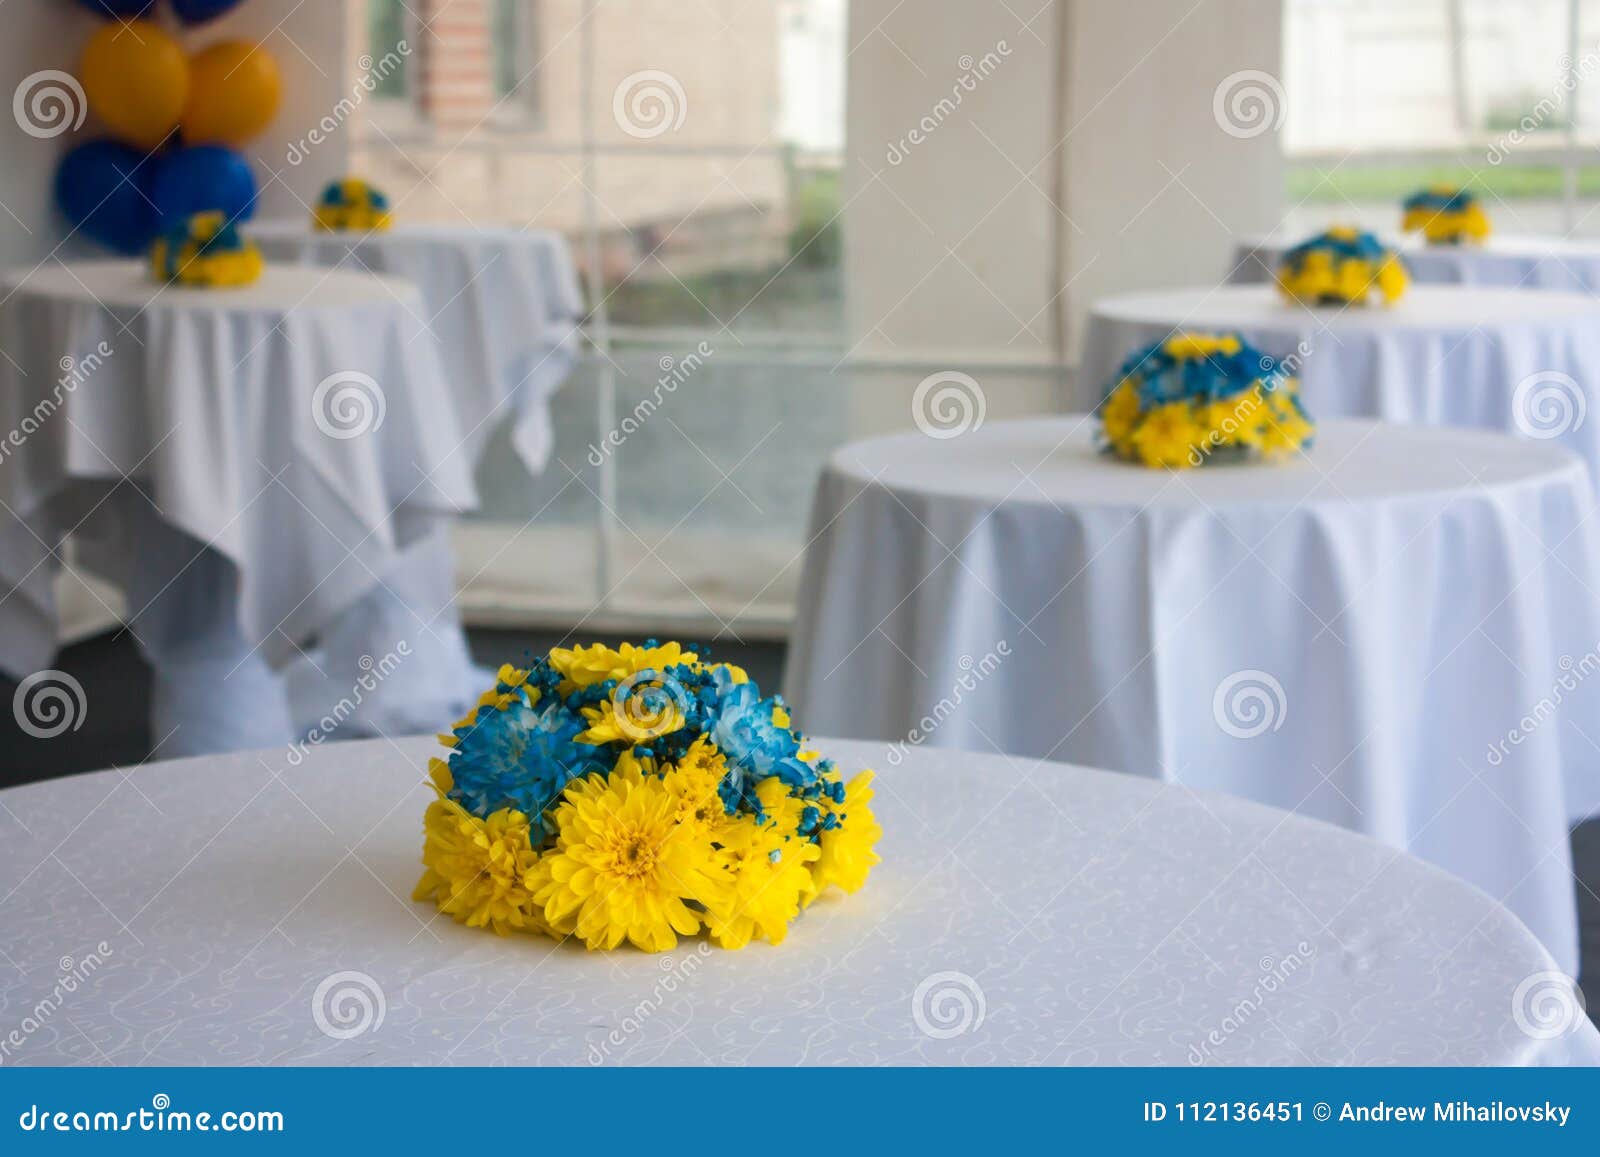 tables with white tablecloths decorated with flowers